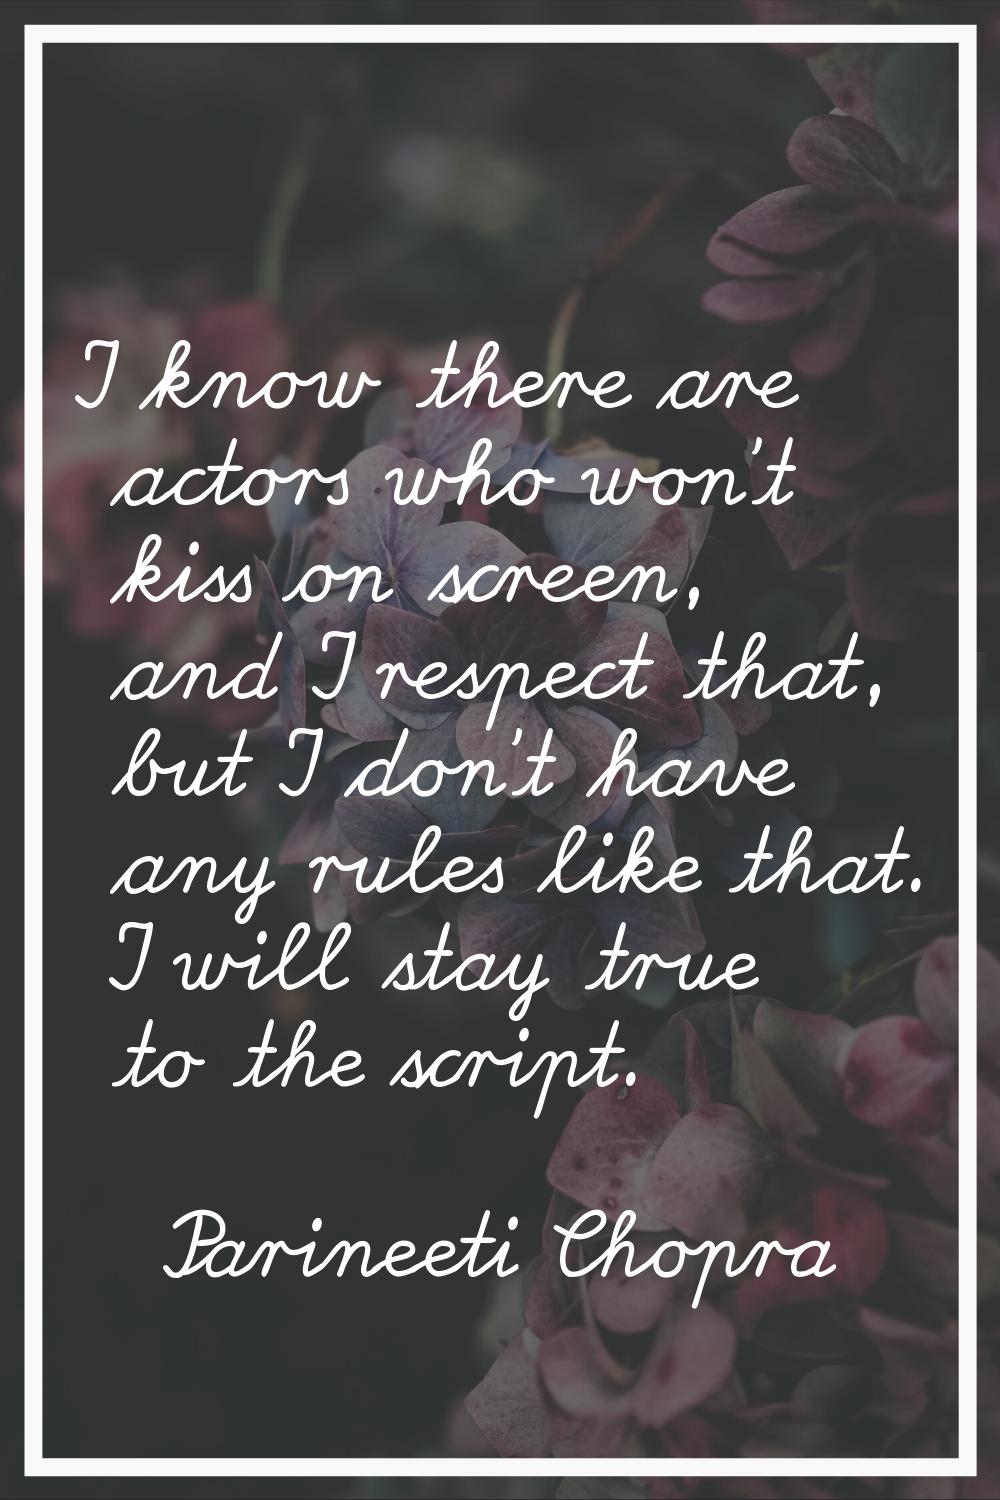 I know there are actors who won't kiss on screen, and I respect that, but I don't have any rules li